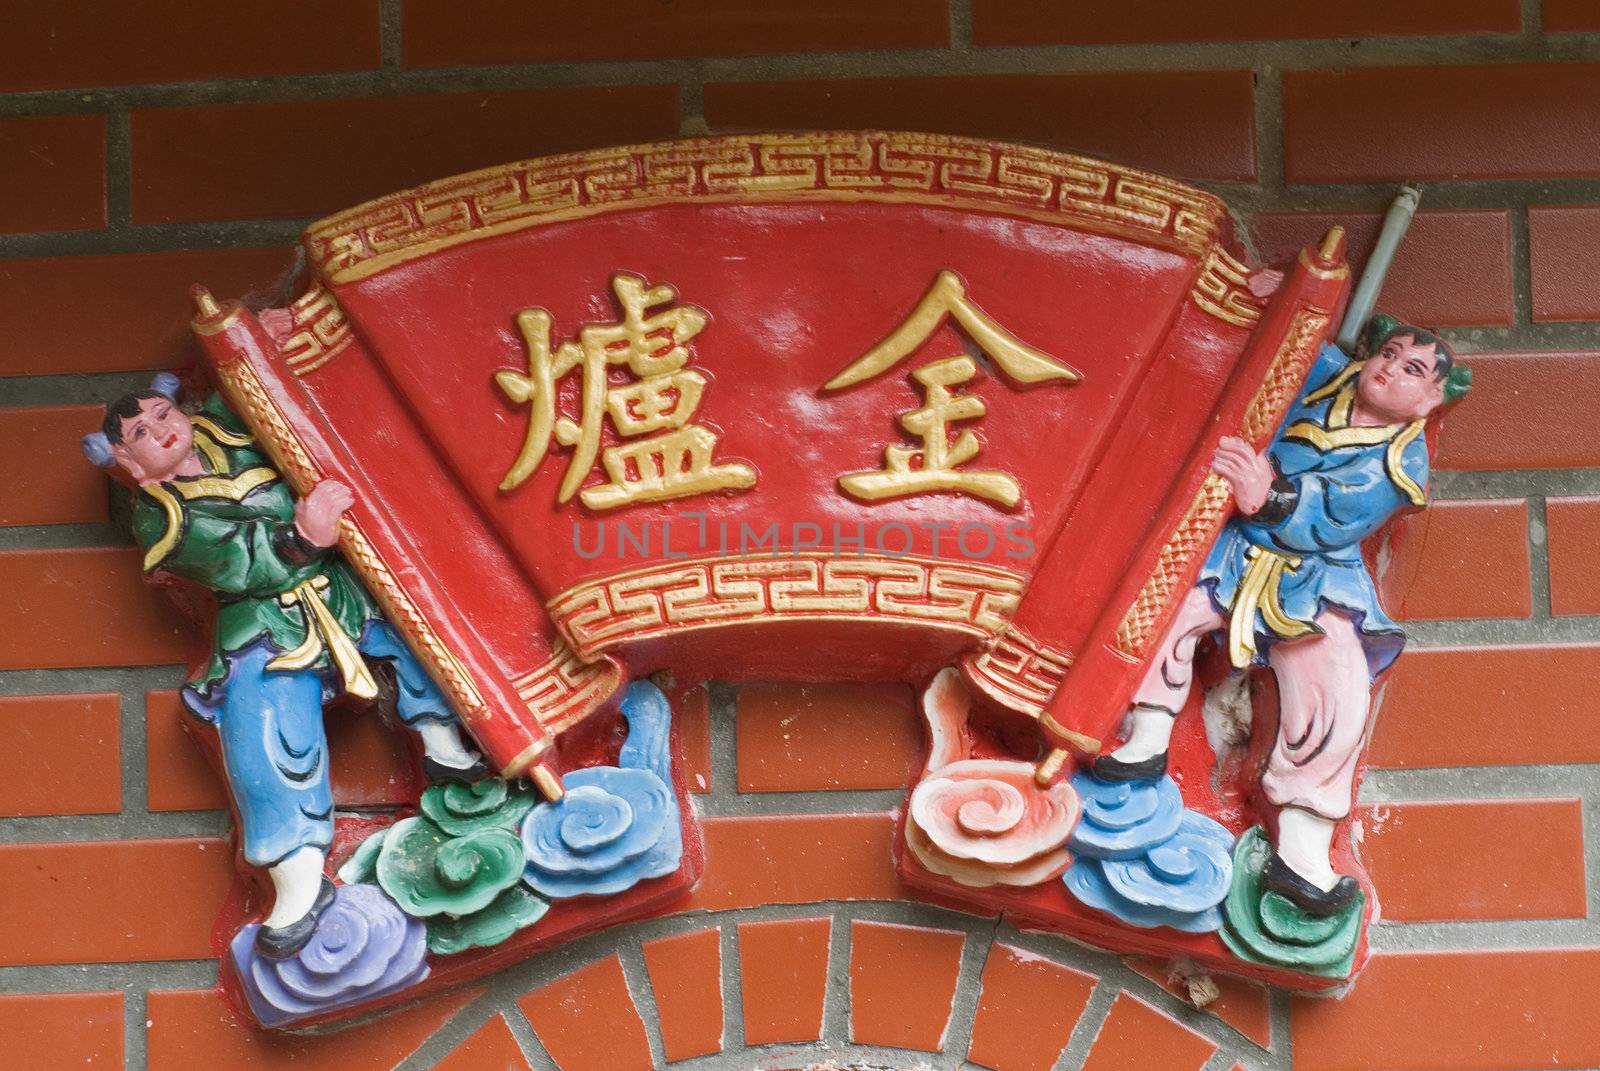 A beautiful Taiwan temple decoration in front of censer, it's so colorful and cute.